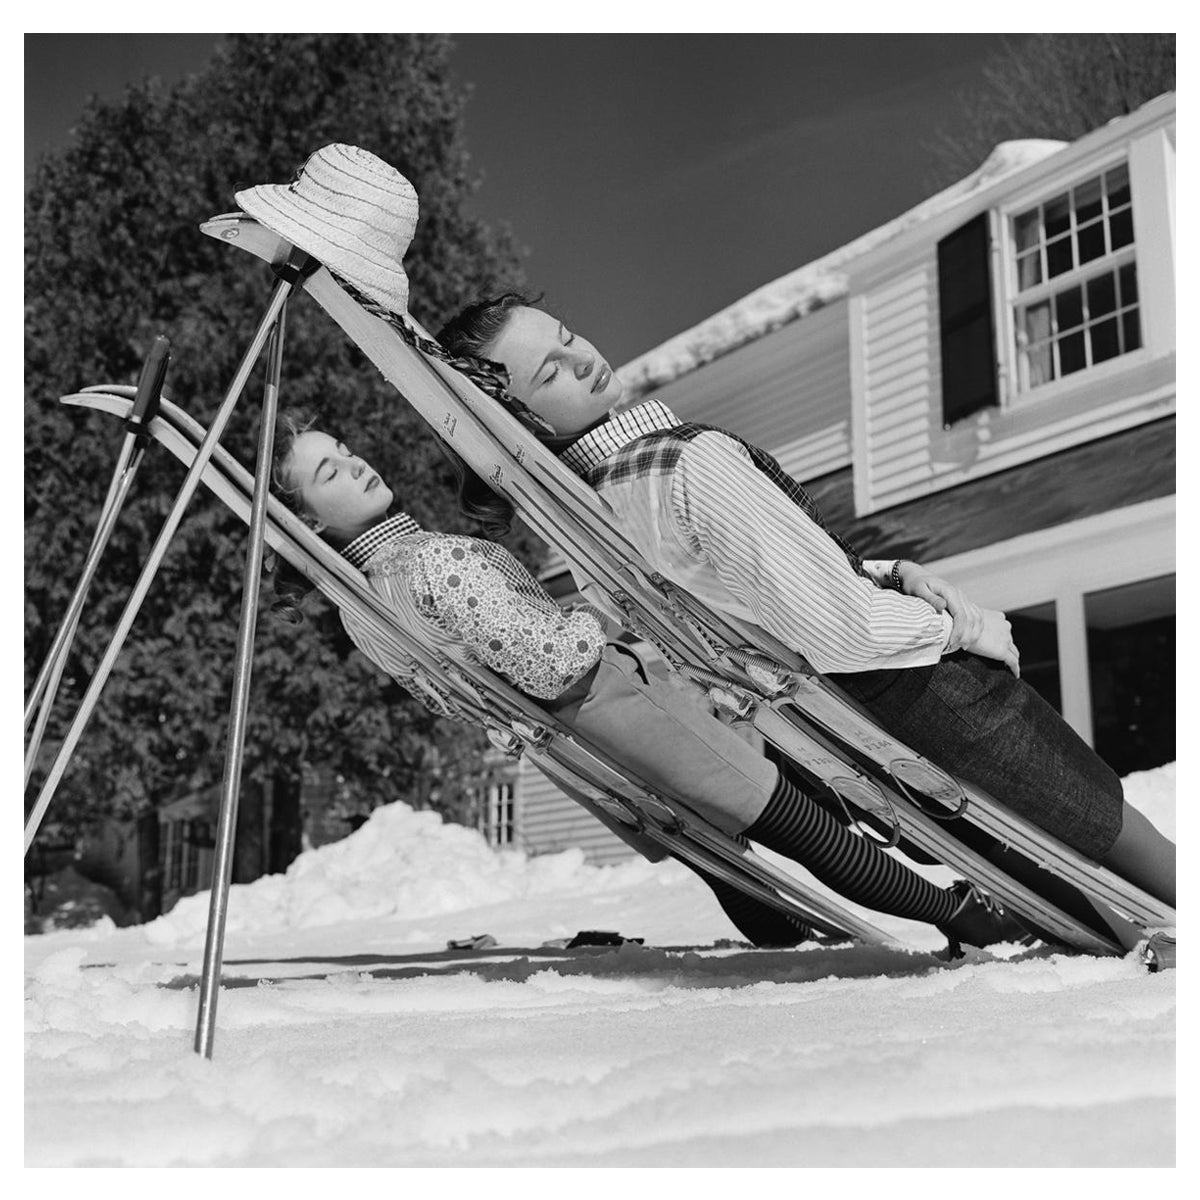 Slim Aarons Black and White Photograph - New England Skiing